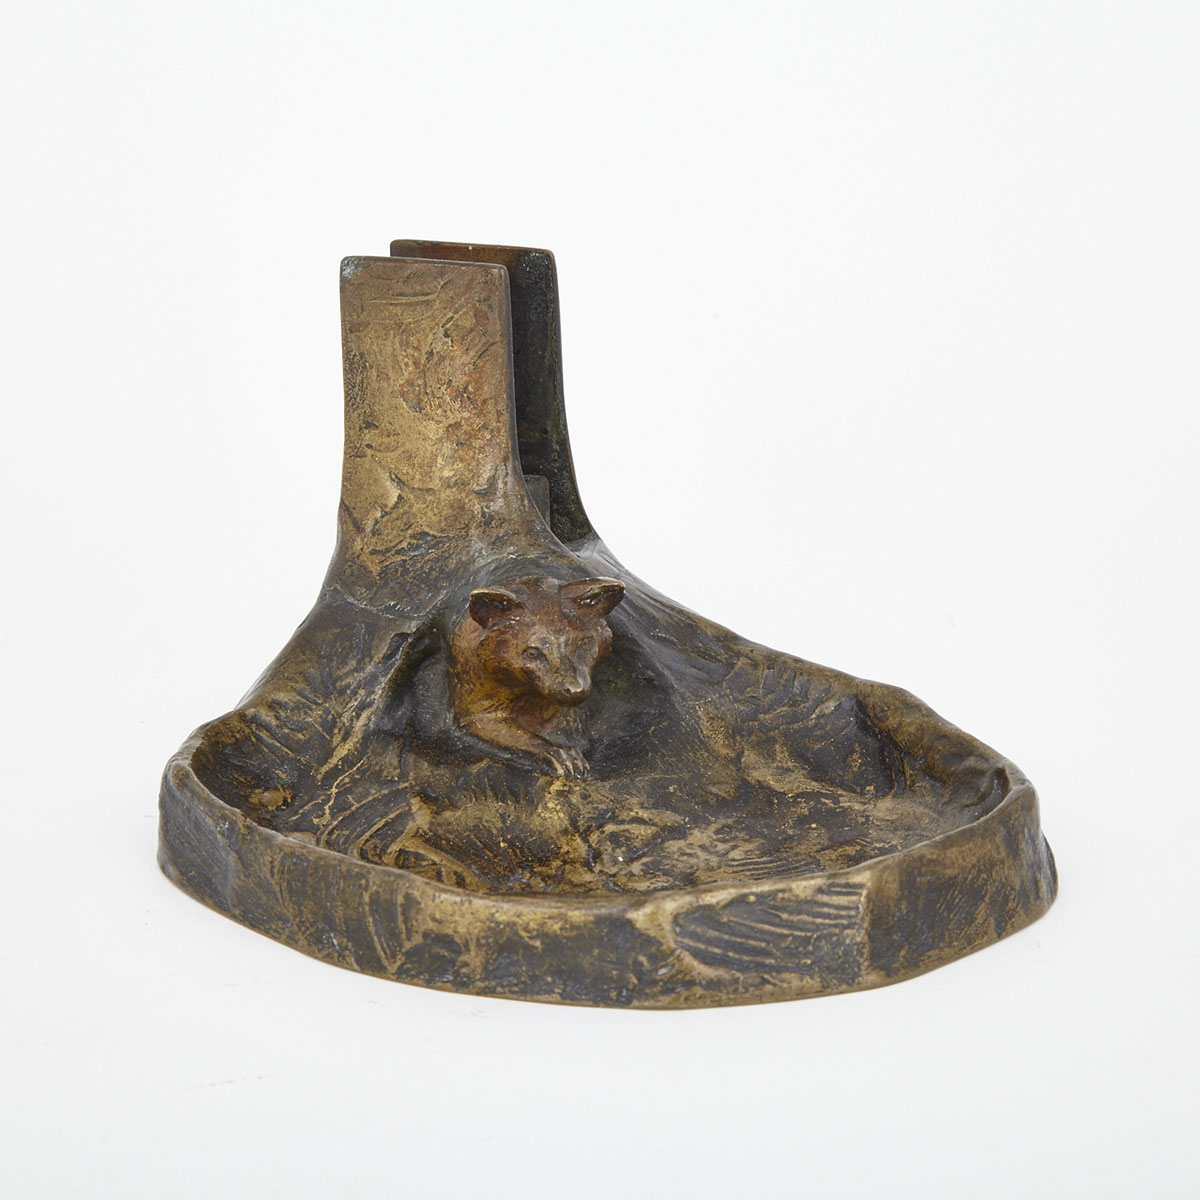 Austrian Cold Painted Bronze Ashtray with Matchbox Holder, Adolph Joseph Pohl (1872-1930) early 20th century